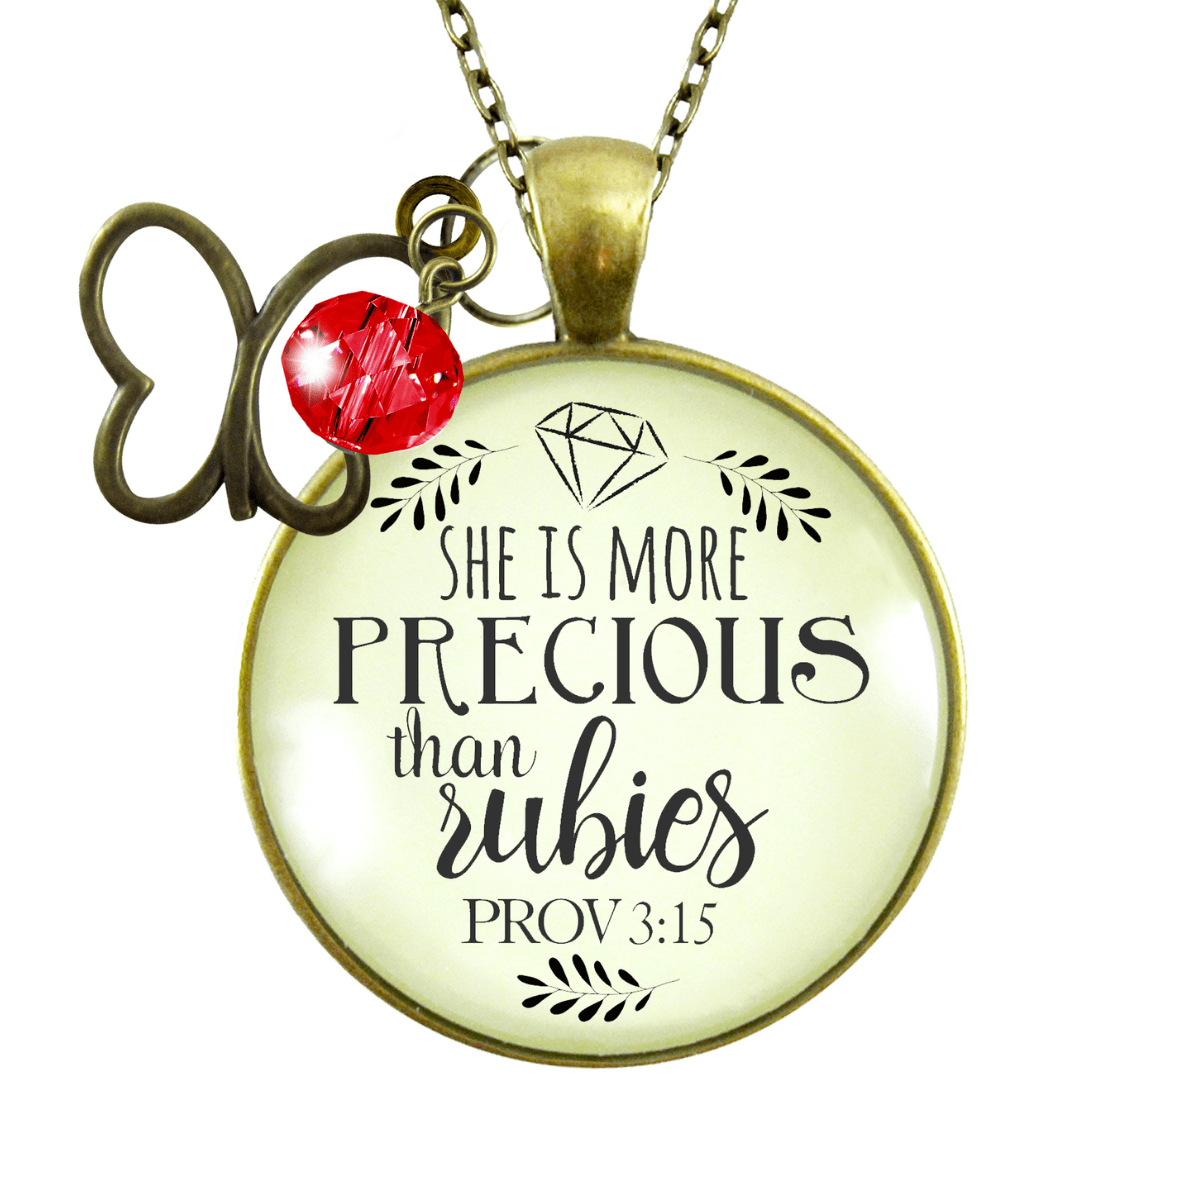 She More Precious Rubies Necklace Fashion Faith Inspire Jewelry Cherished Woman 36" - Gutsy Goodness Handmade Jewelry;She More Precious Rubies Necklace Fashion Faith Inspire Jewelry Cherished Woman 36" - Gutsy Goodness Handmade Jewelry Gifts